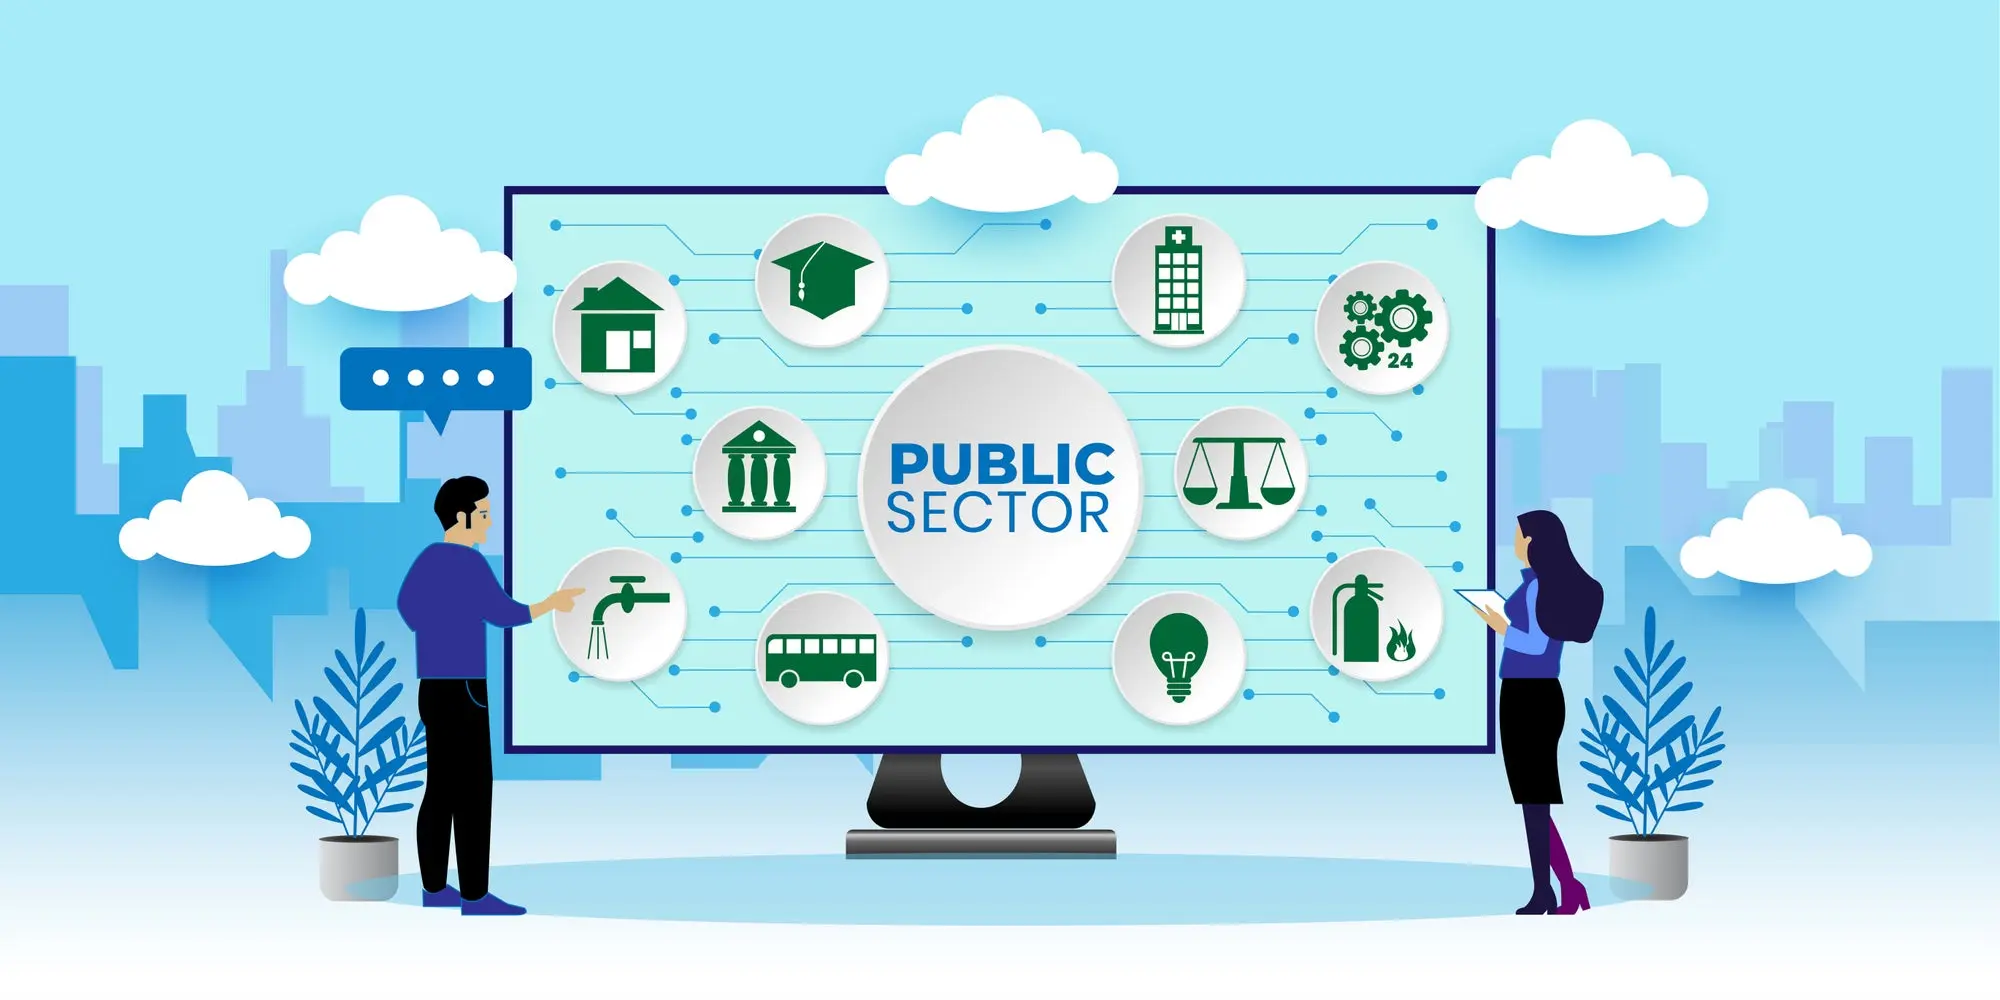 Public Sector Government People Business Concept With icons. Cartoon Vector People Illustration.